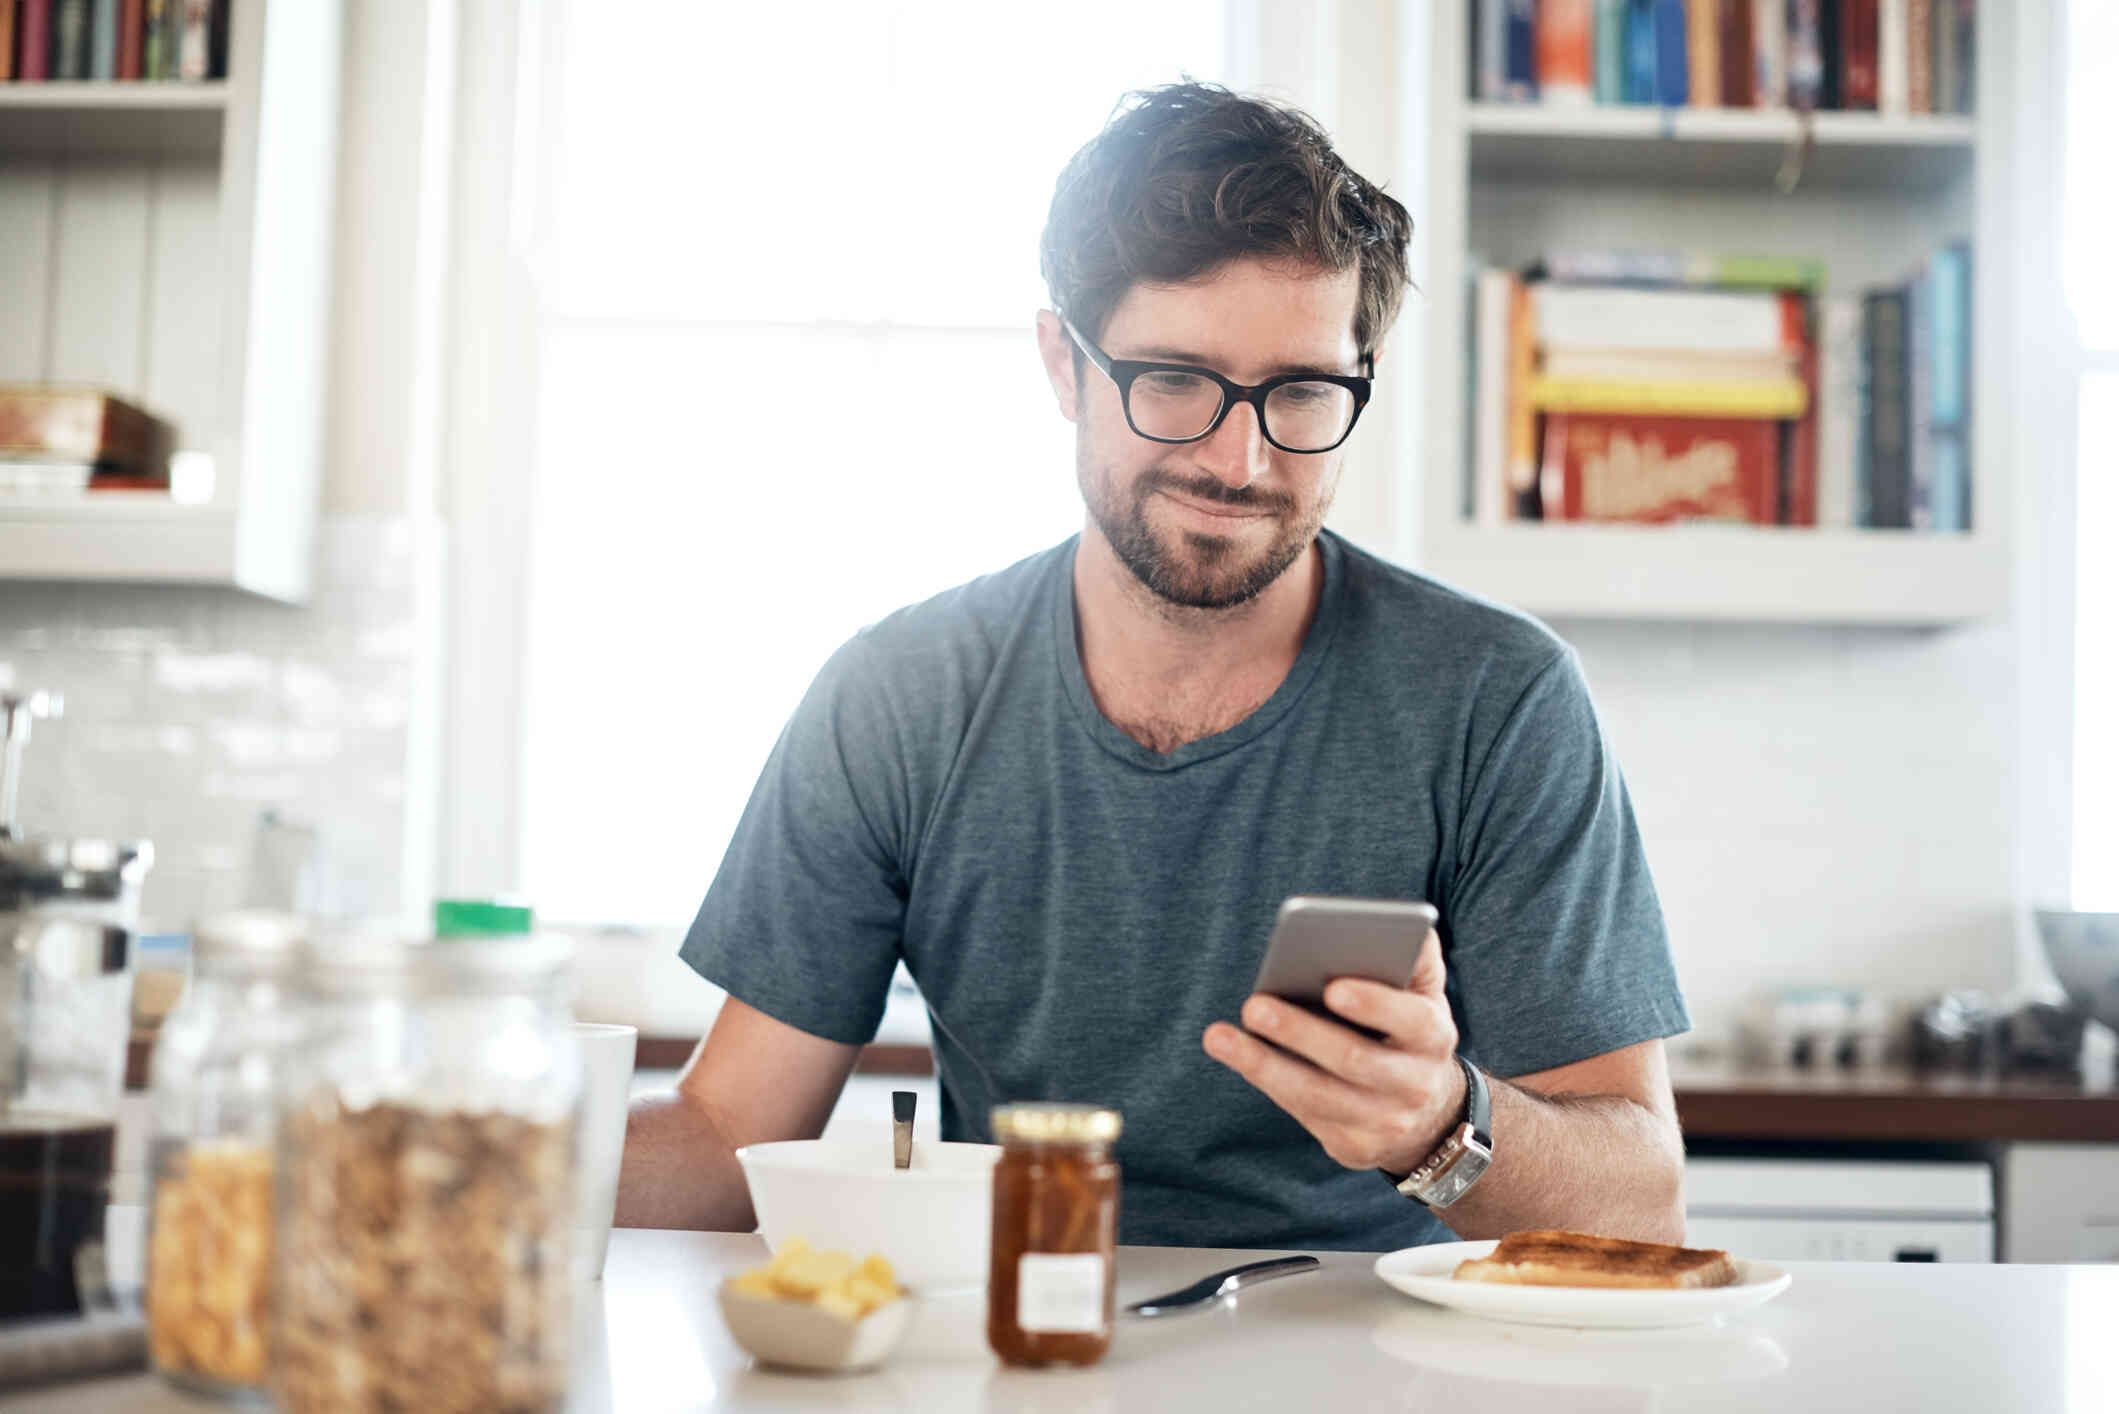 A man in a grey shirt sits at the breakfast table with a bowl of cereal and smiles softly down at the phone in his hand.